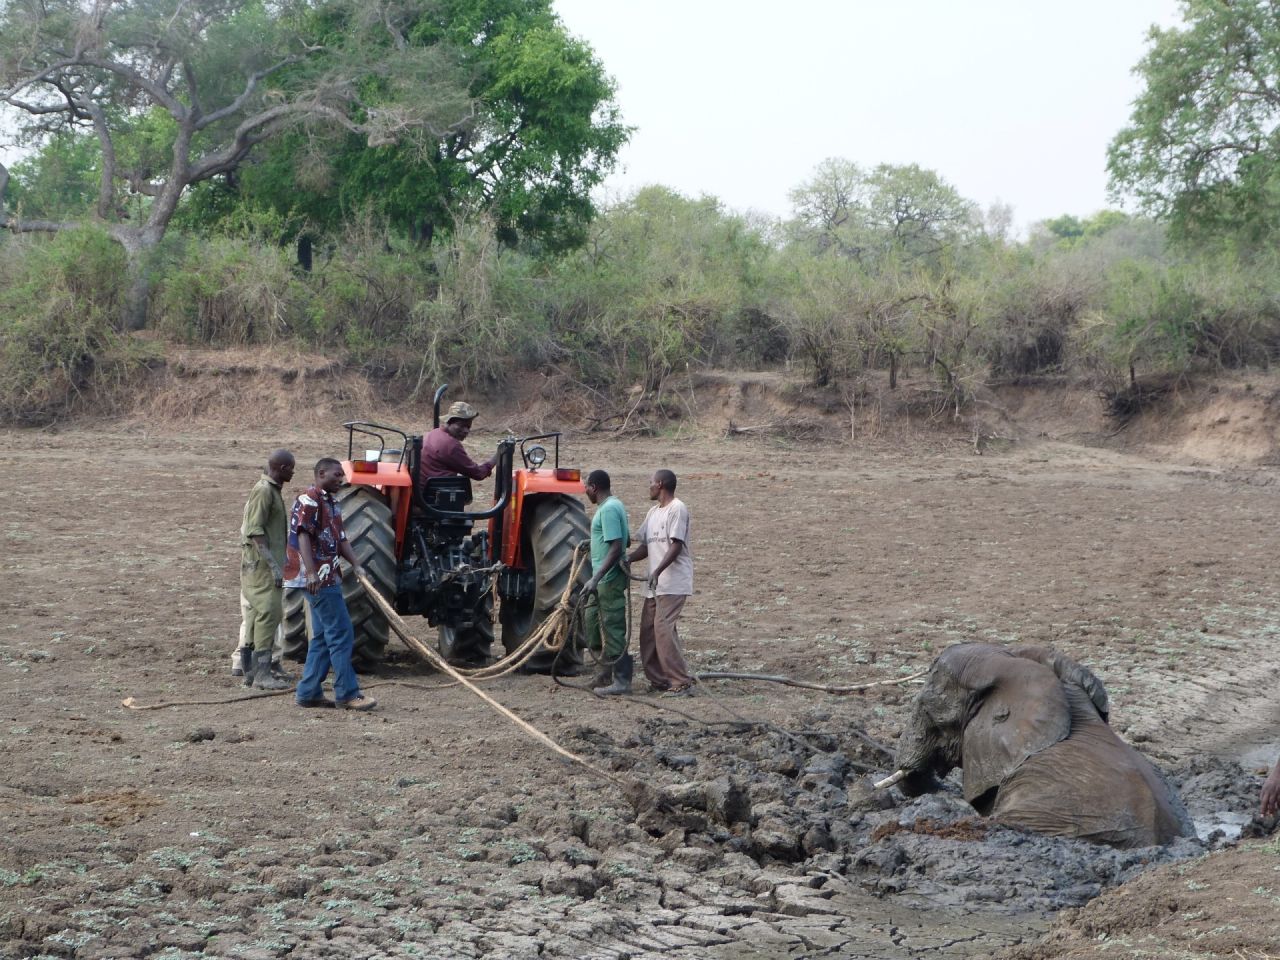 The weight and size of the adult elephant posed a greater problem. A tractor was brought in, in order  to extract her from the mud.